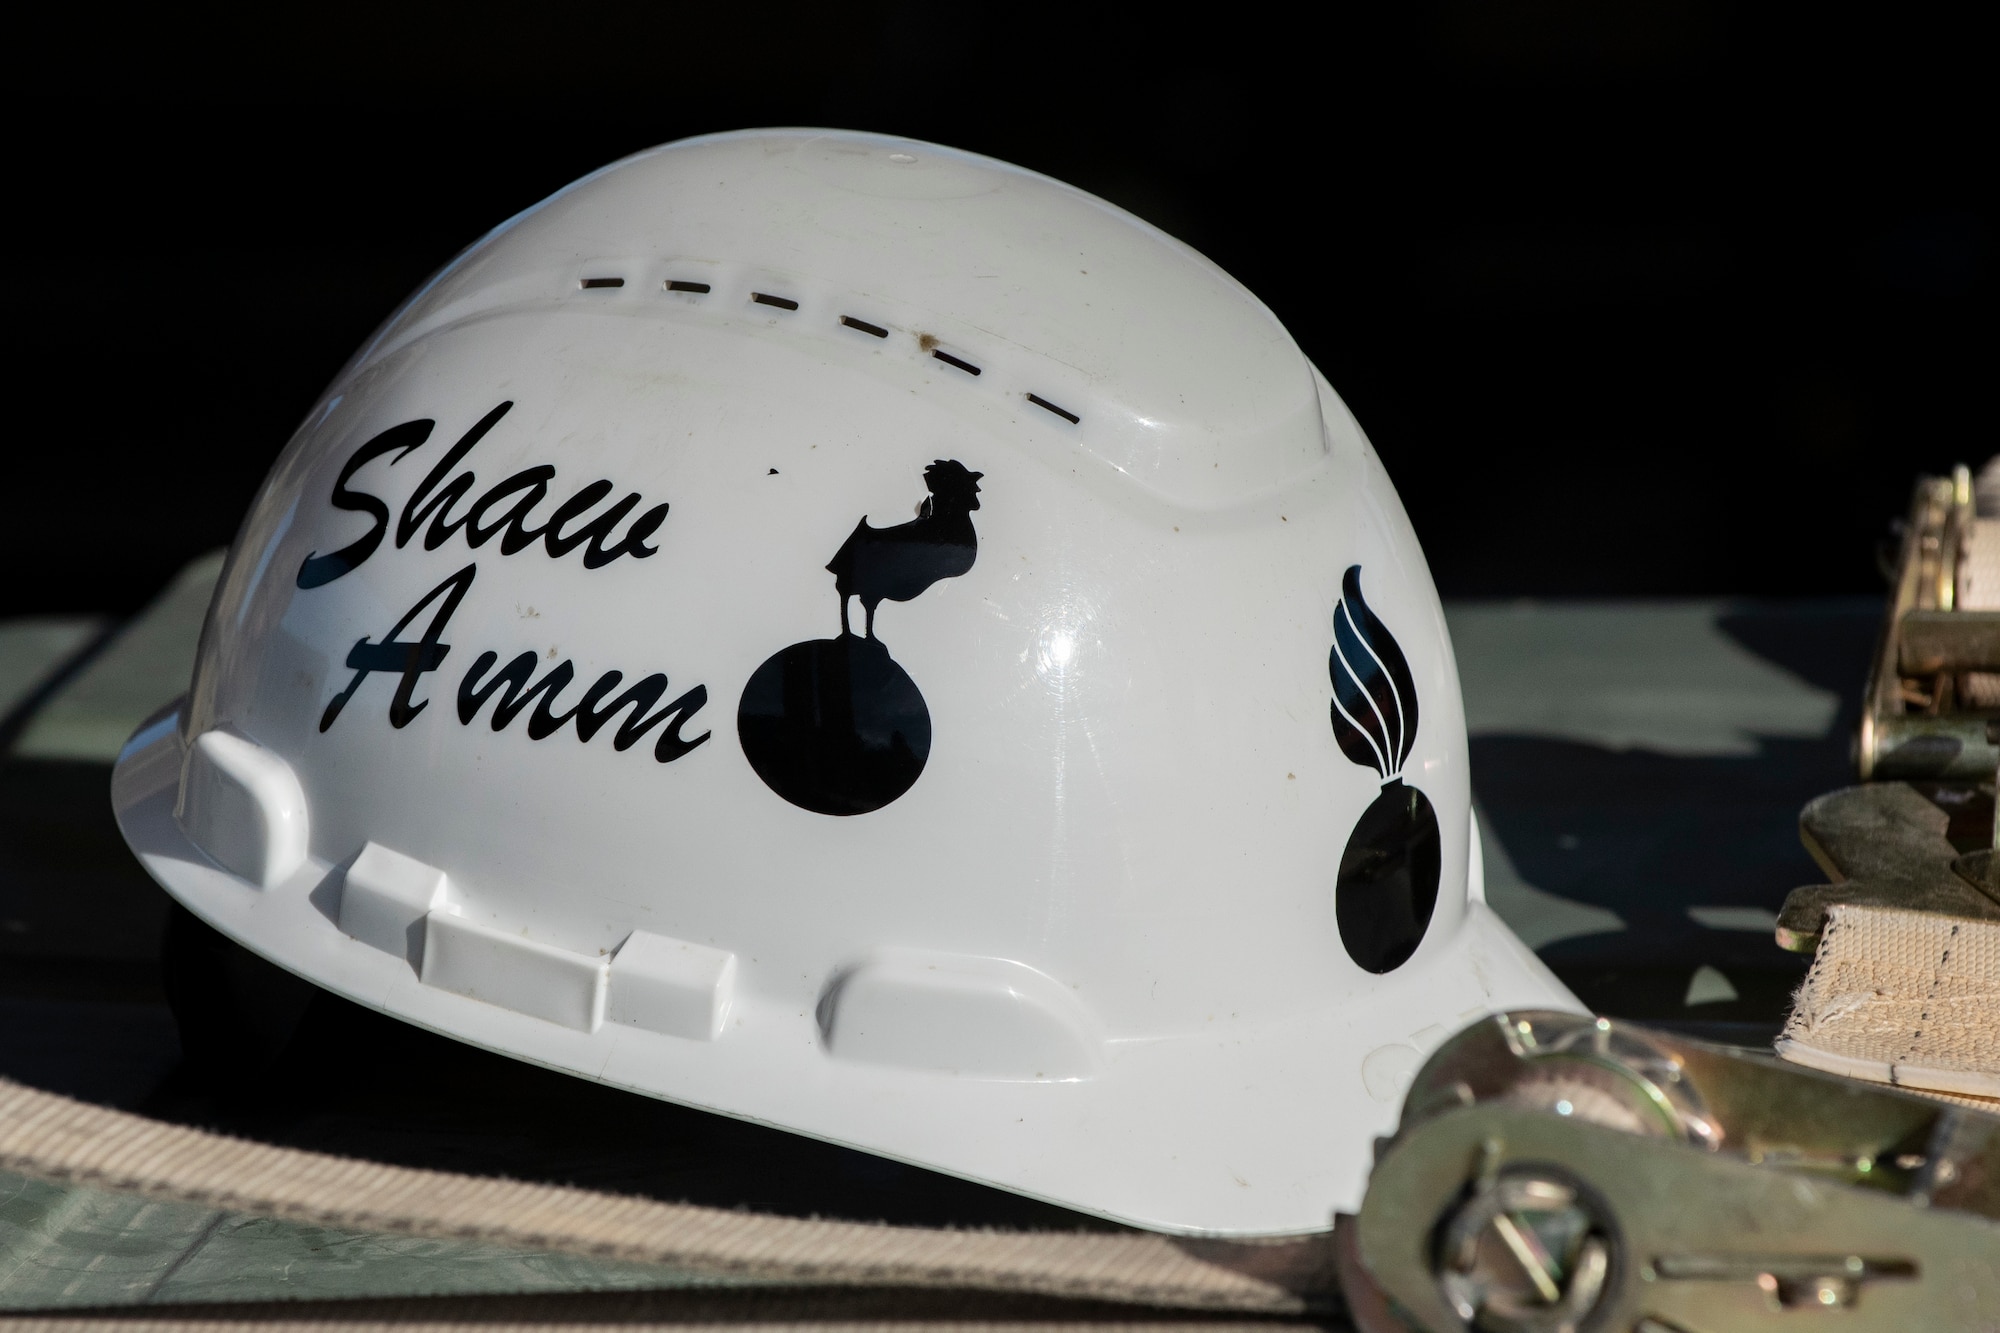 a picture of the helmet worn by the AFCOCOMP team.